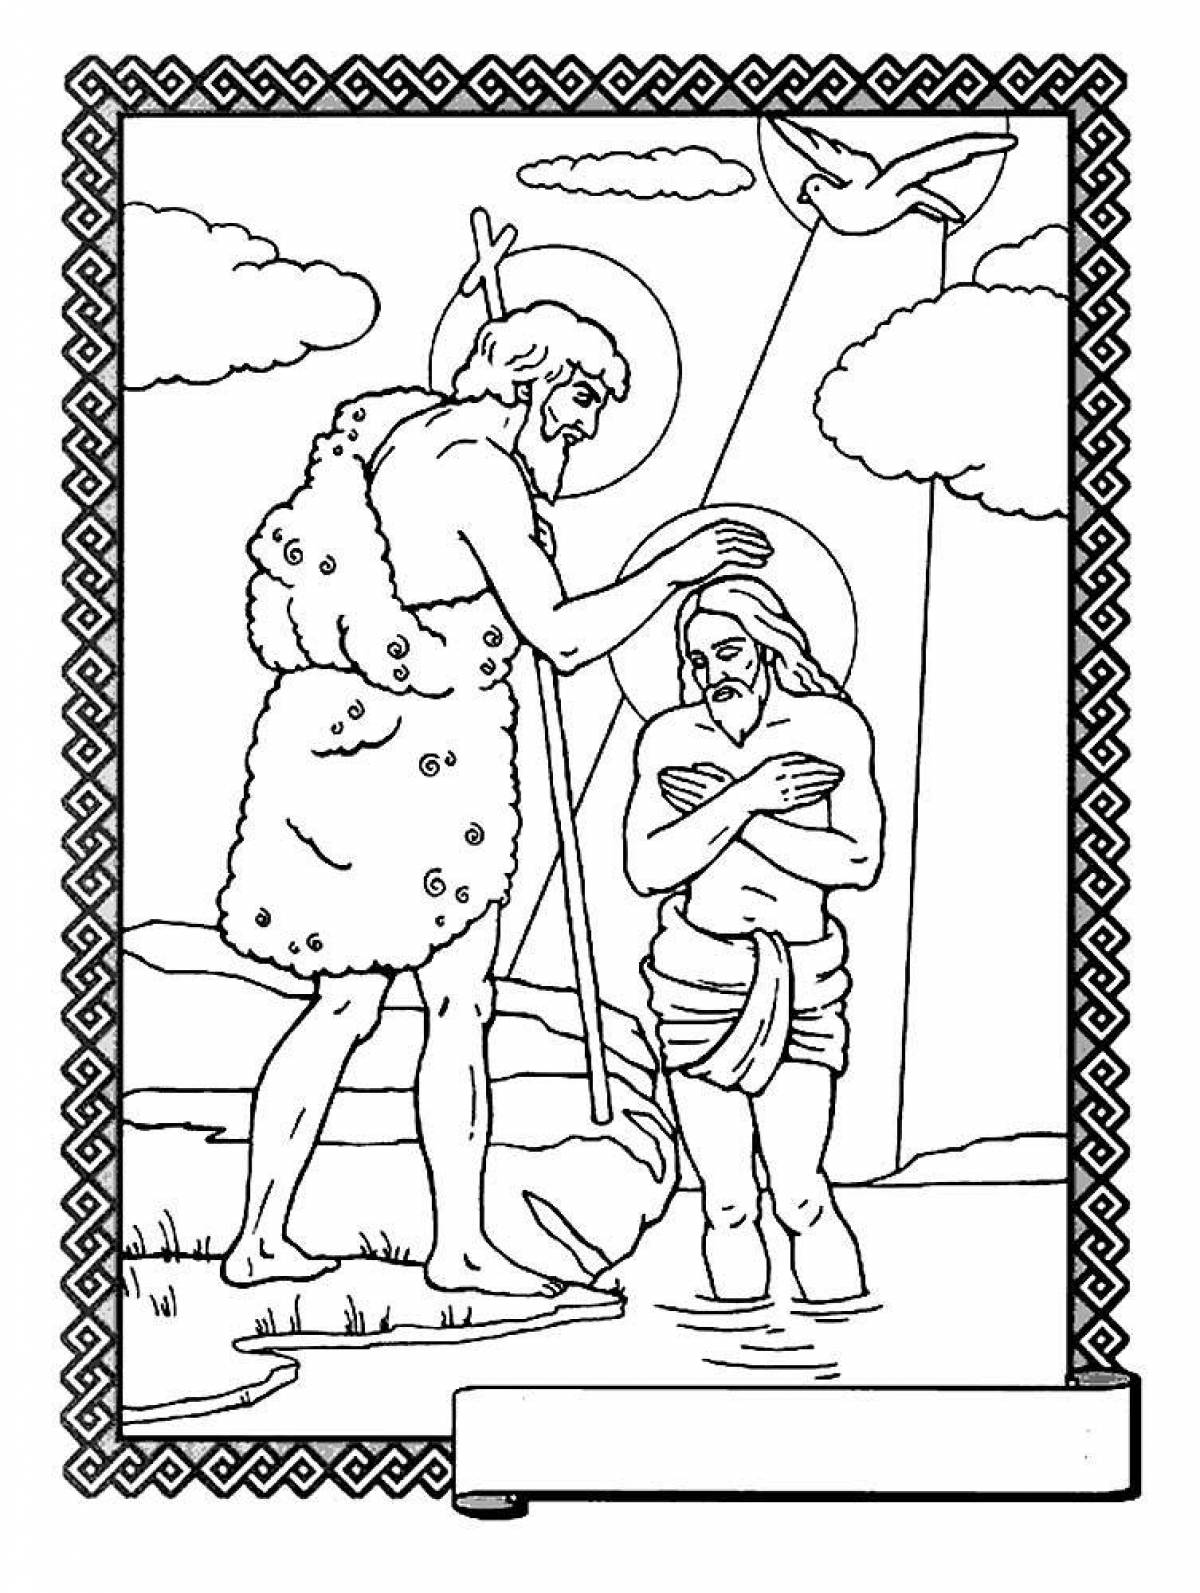 Glitter epiphany coloring page